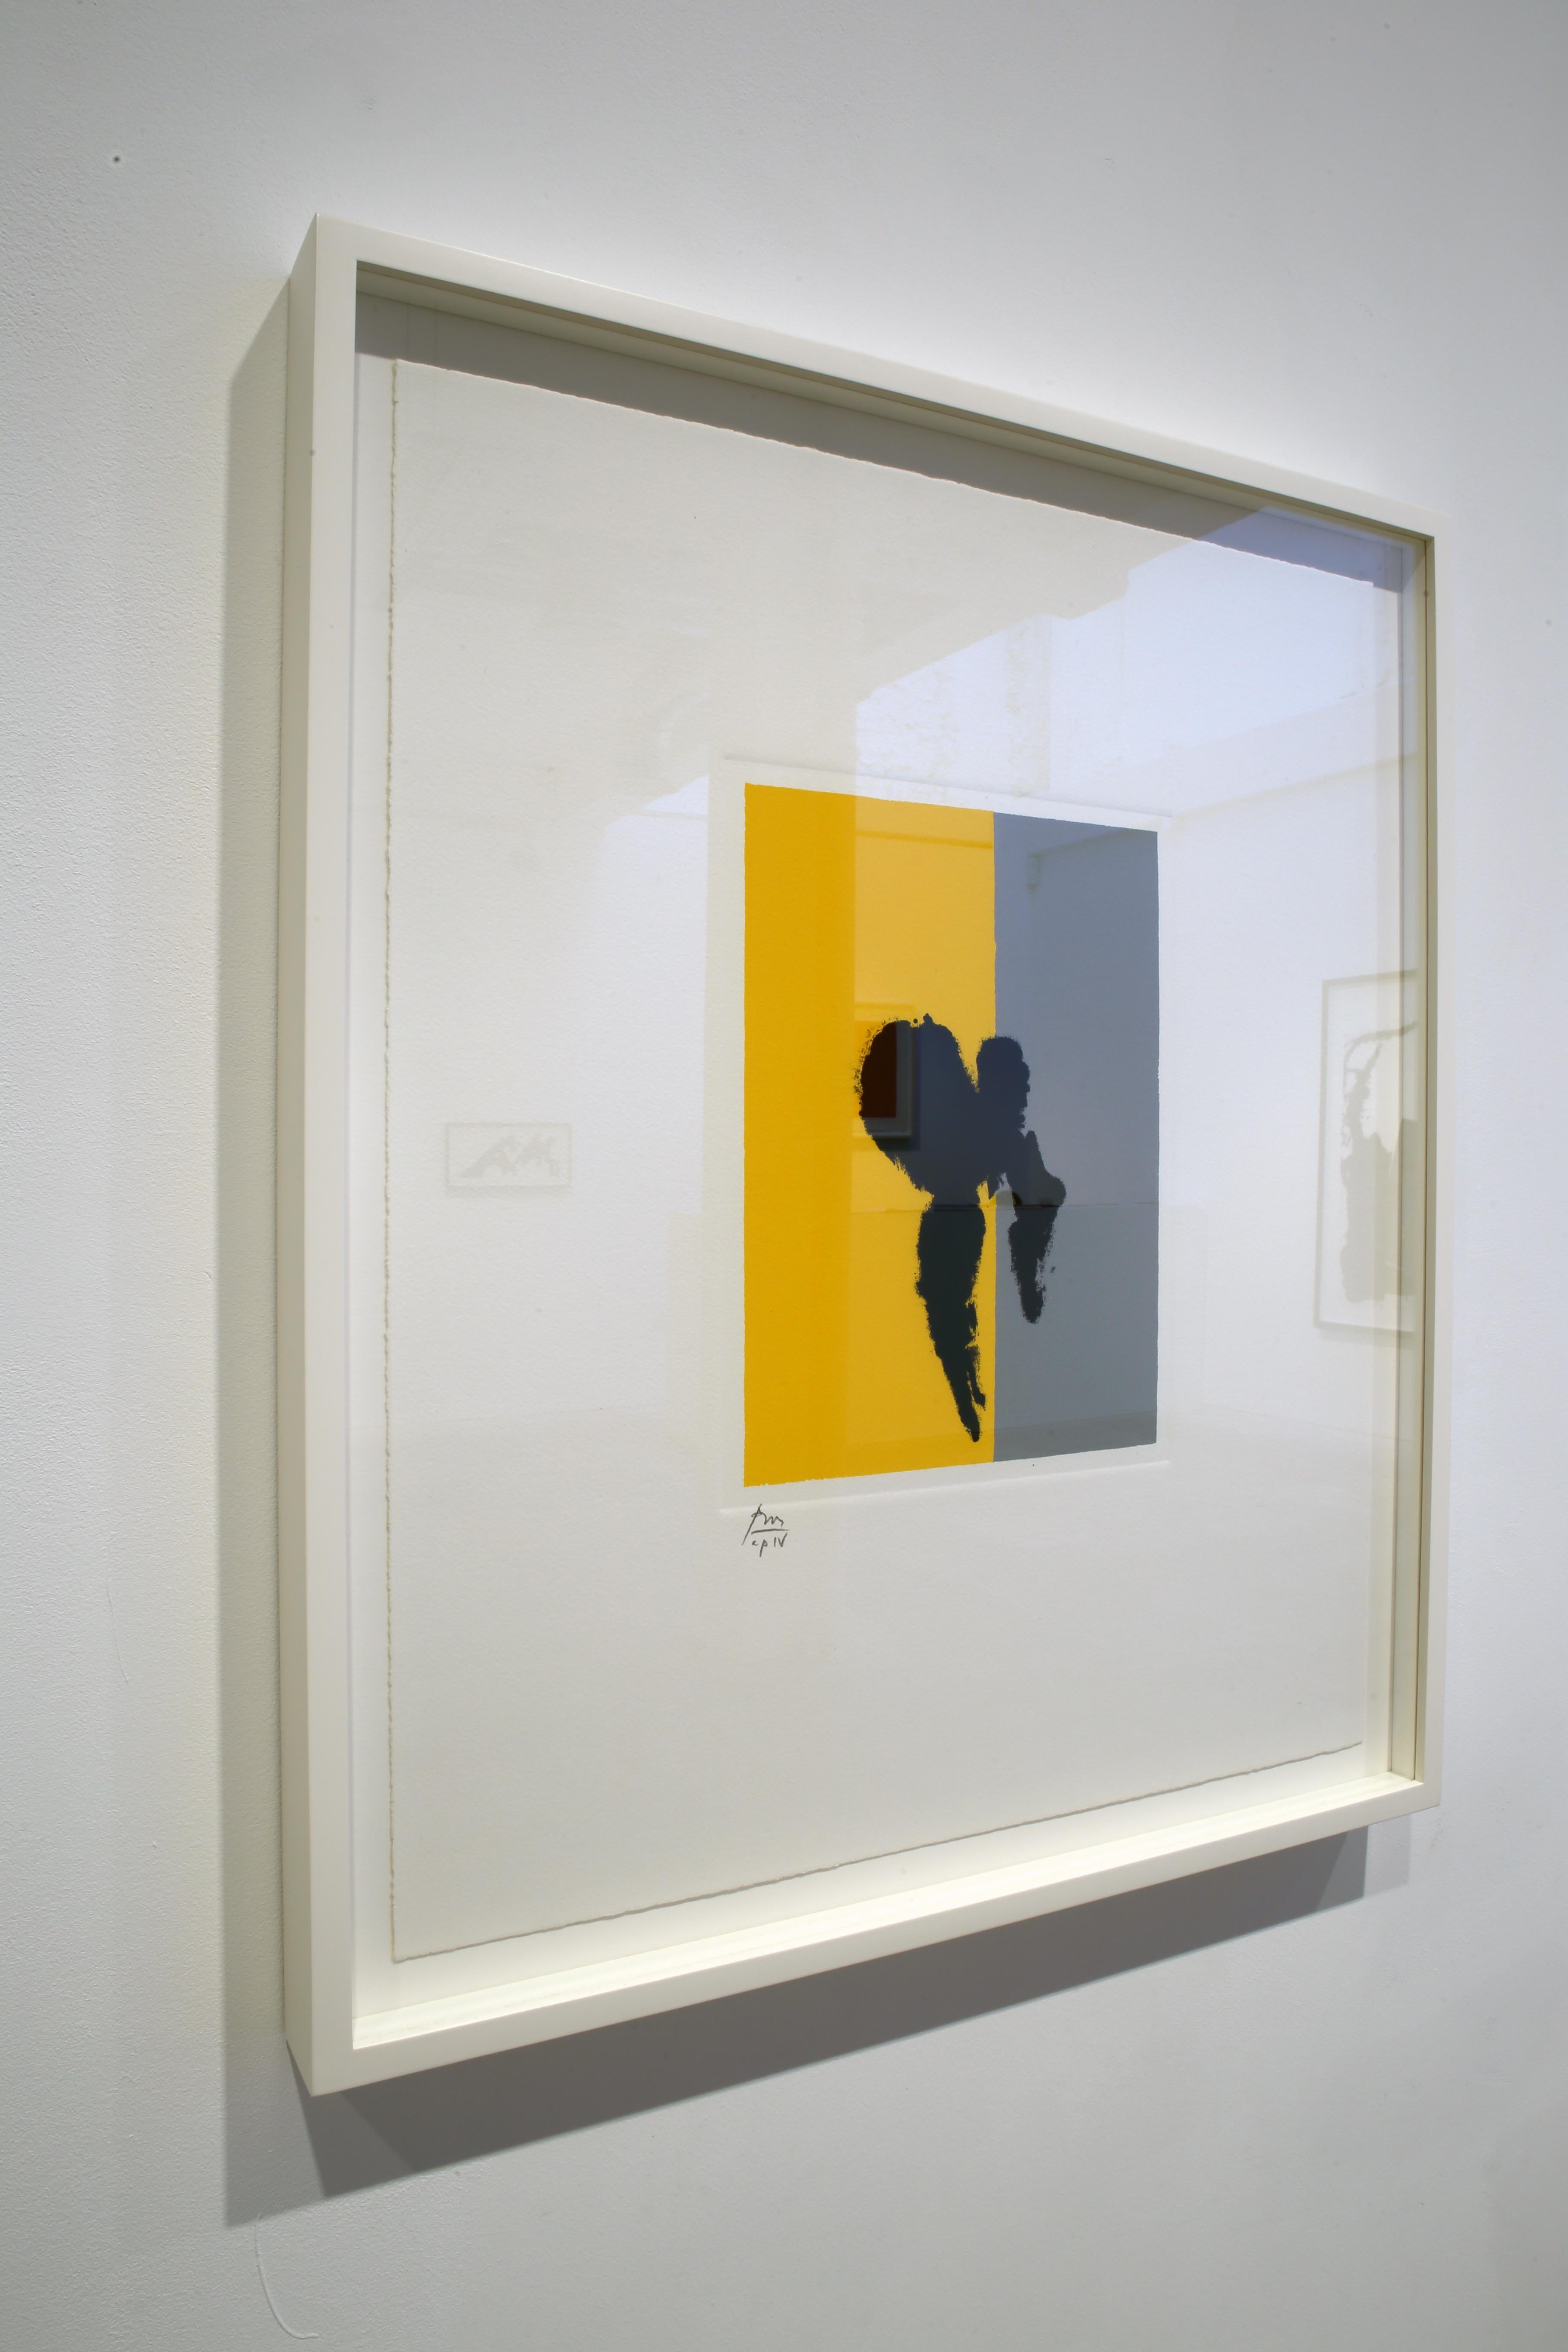 Paris Suite 2 (Summer) - Abstract Expressionist Print by Robert Motherwell